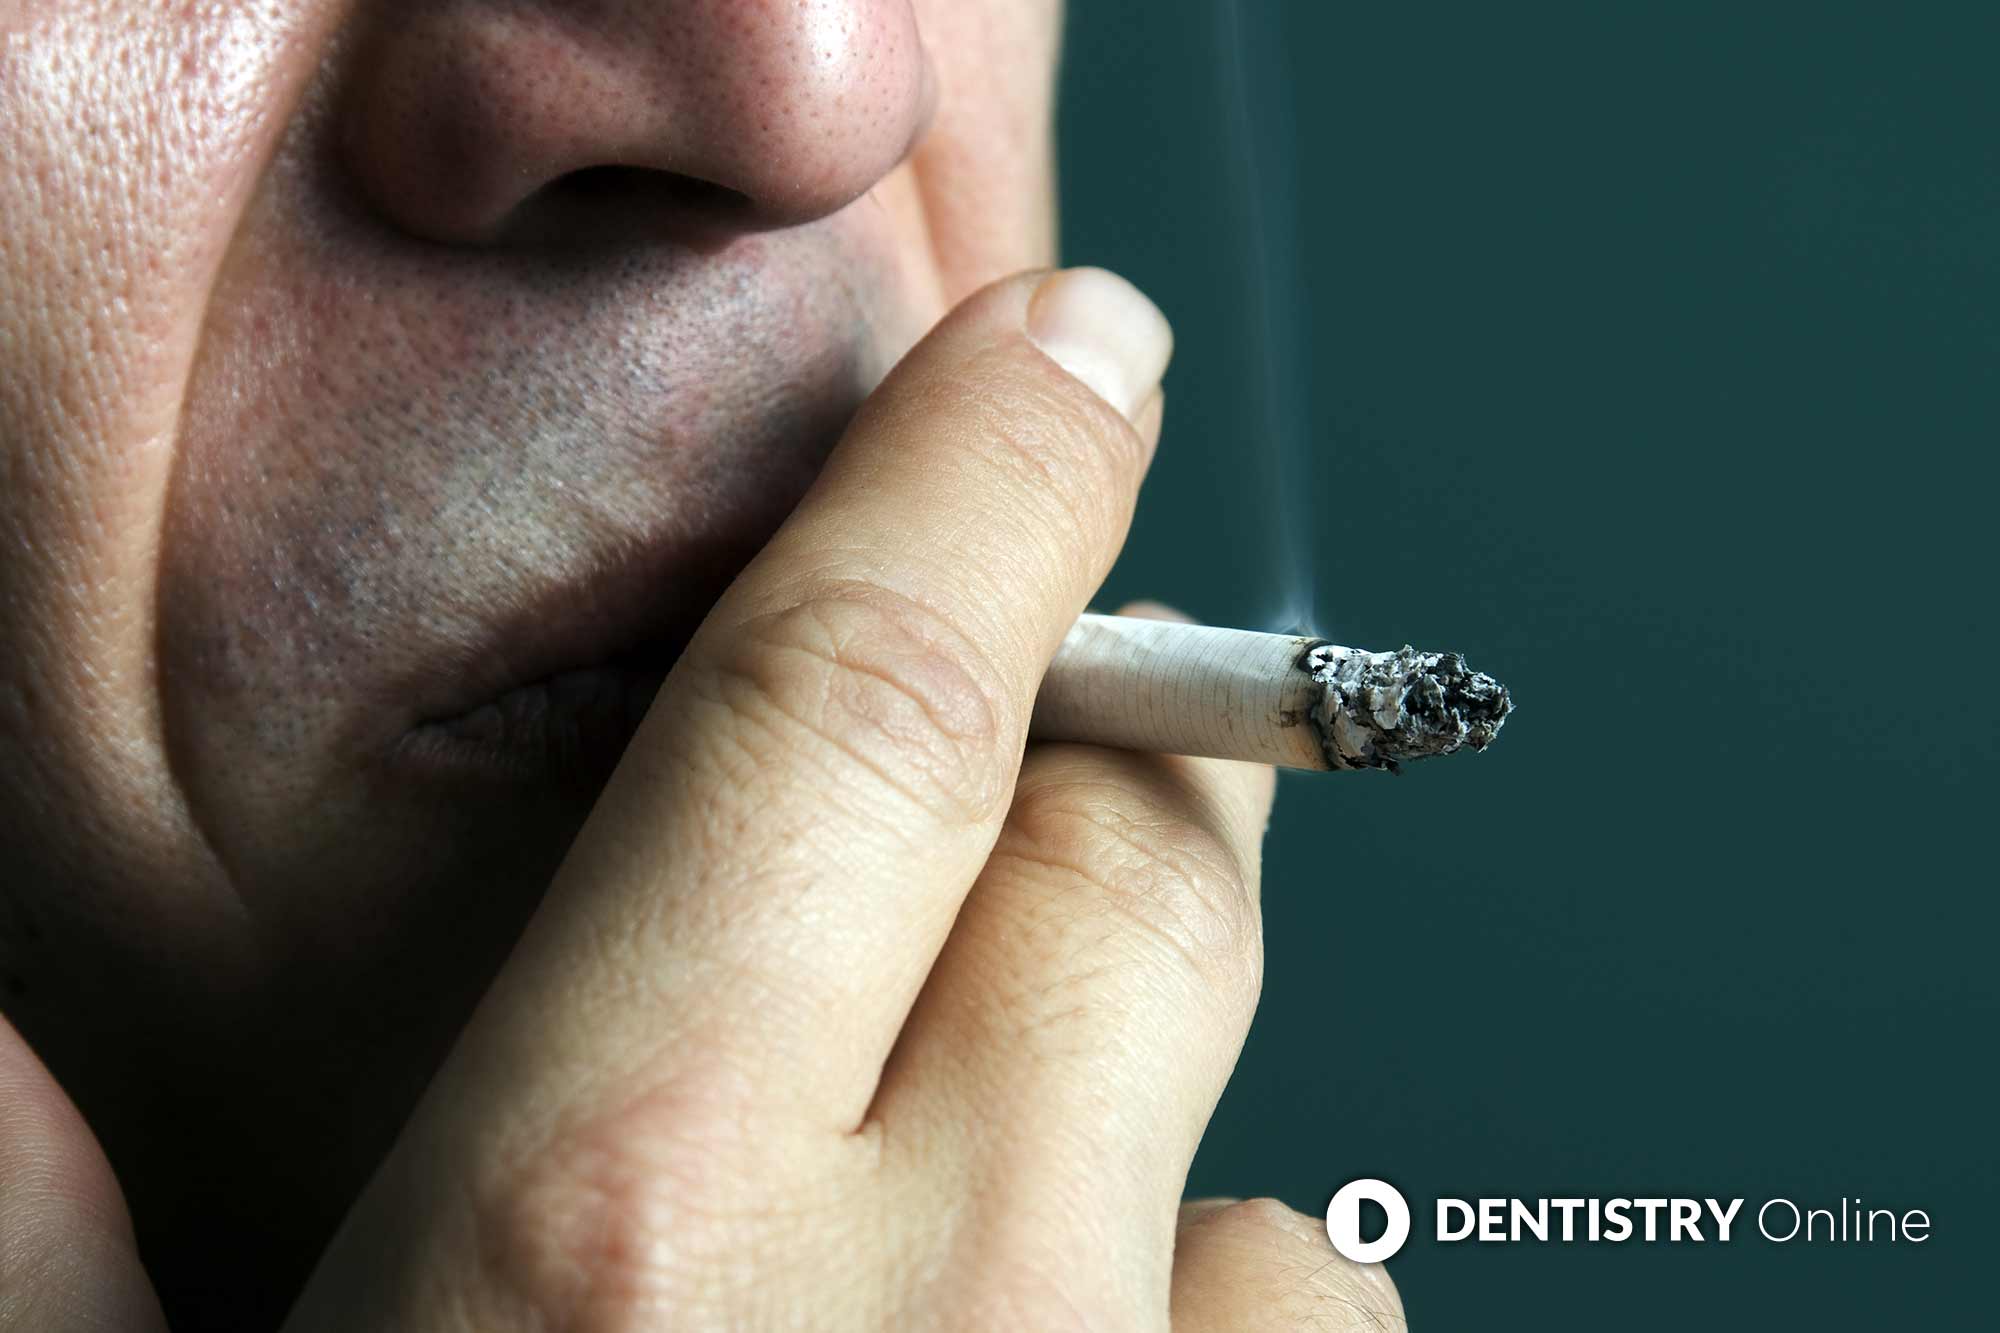 Mouth cancer referrals have fallen by one third since the start of the pandemic – sparking calls for urgent action